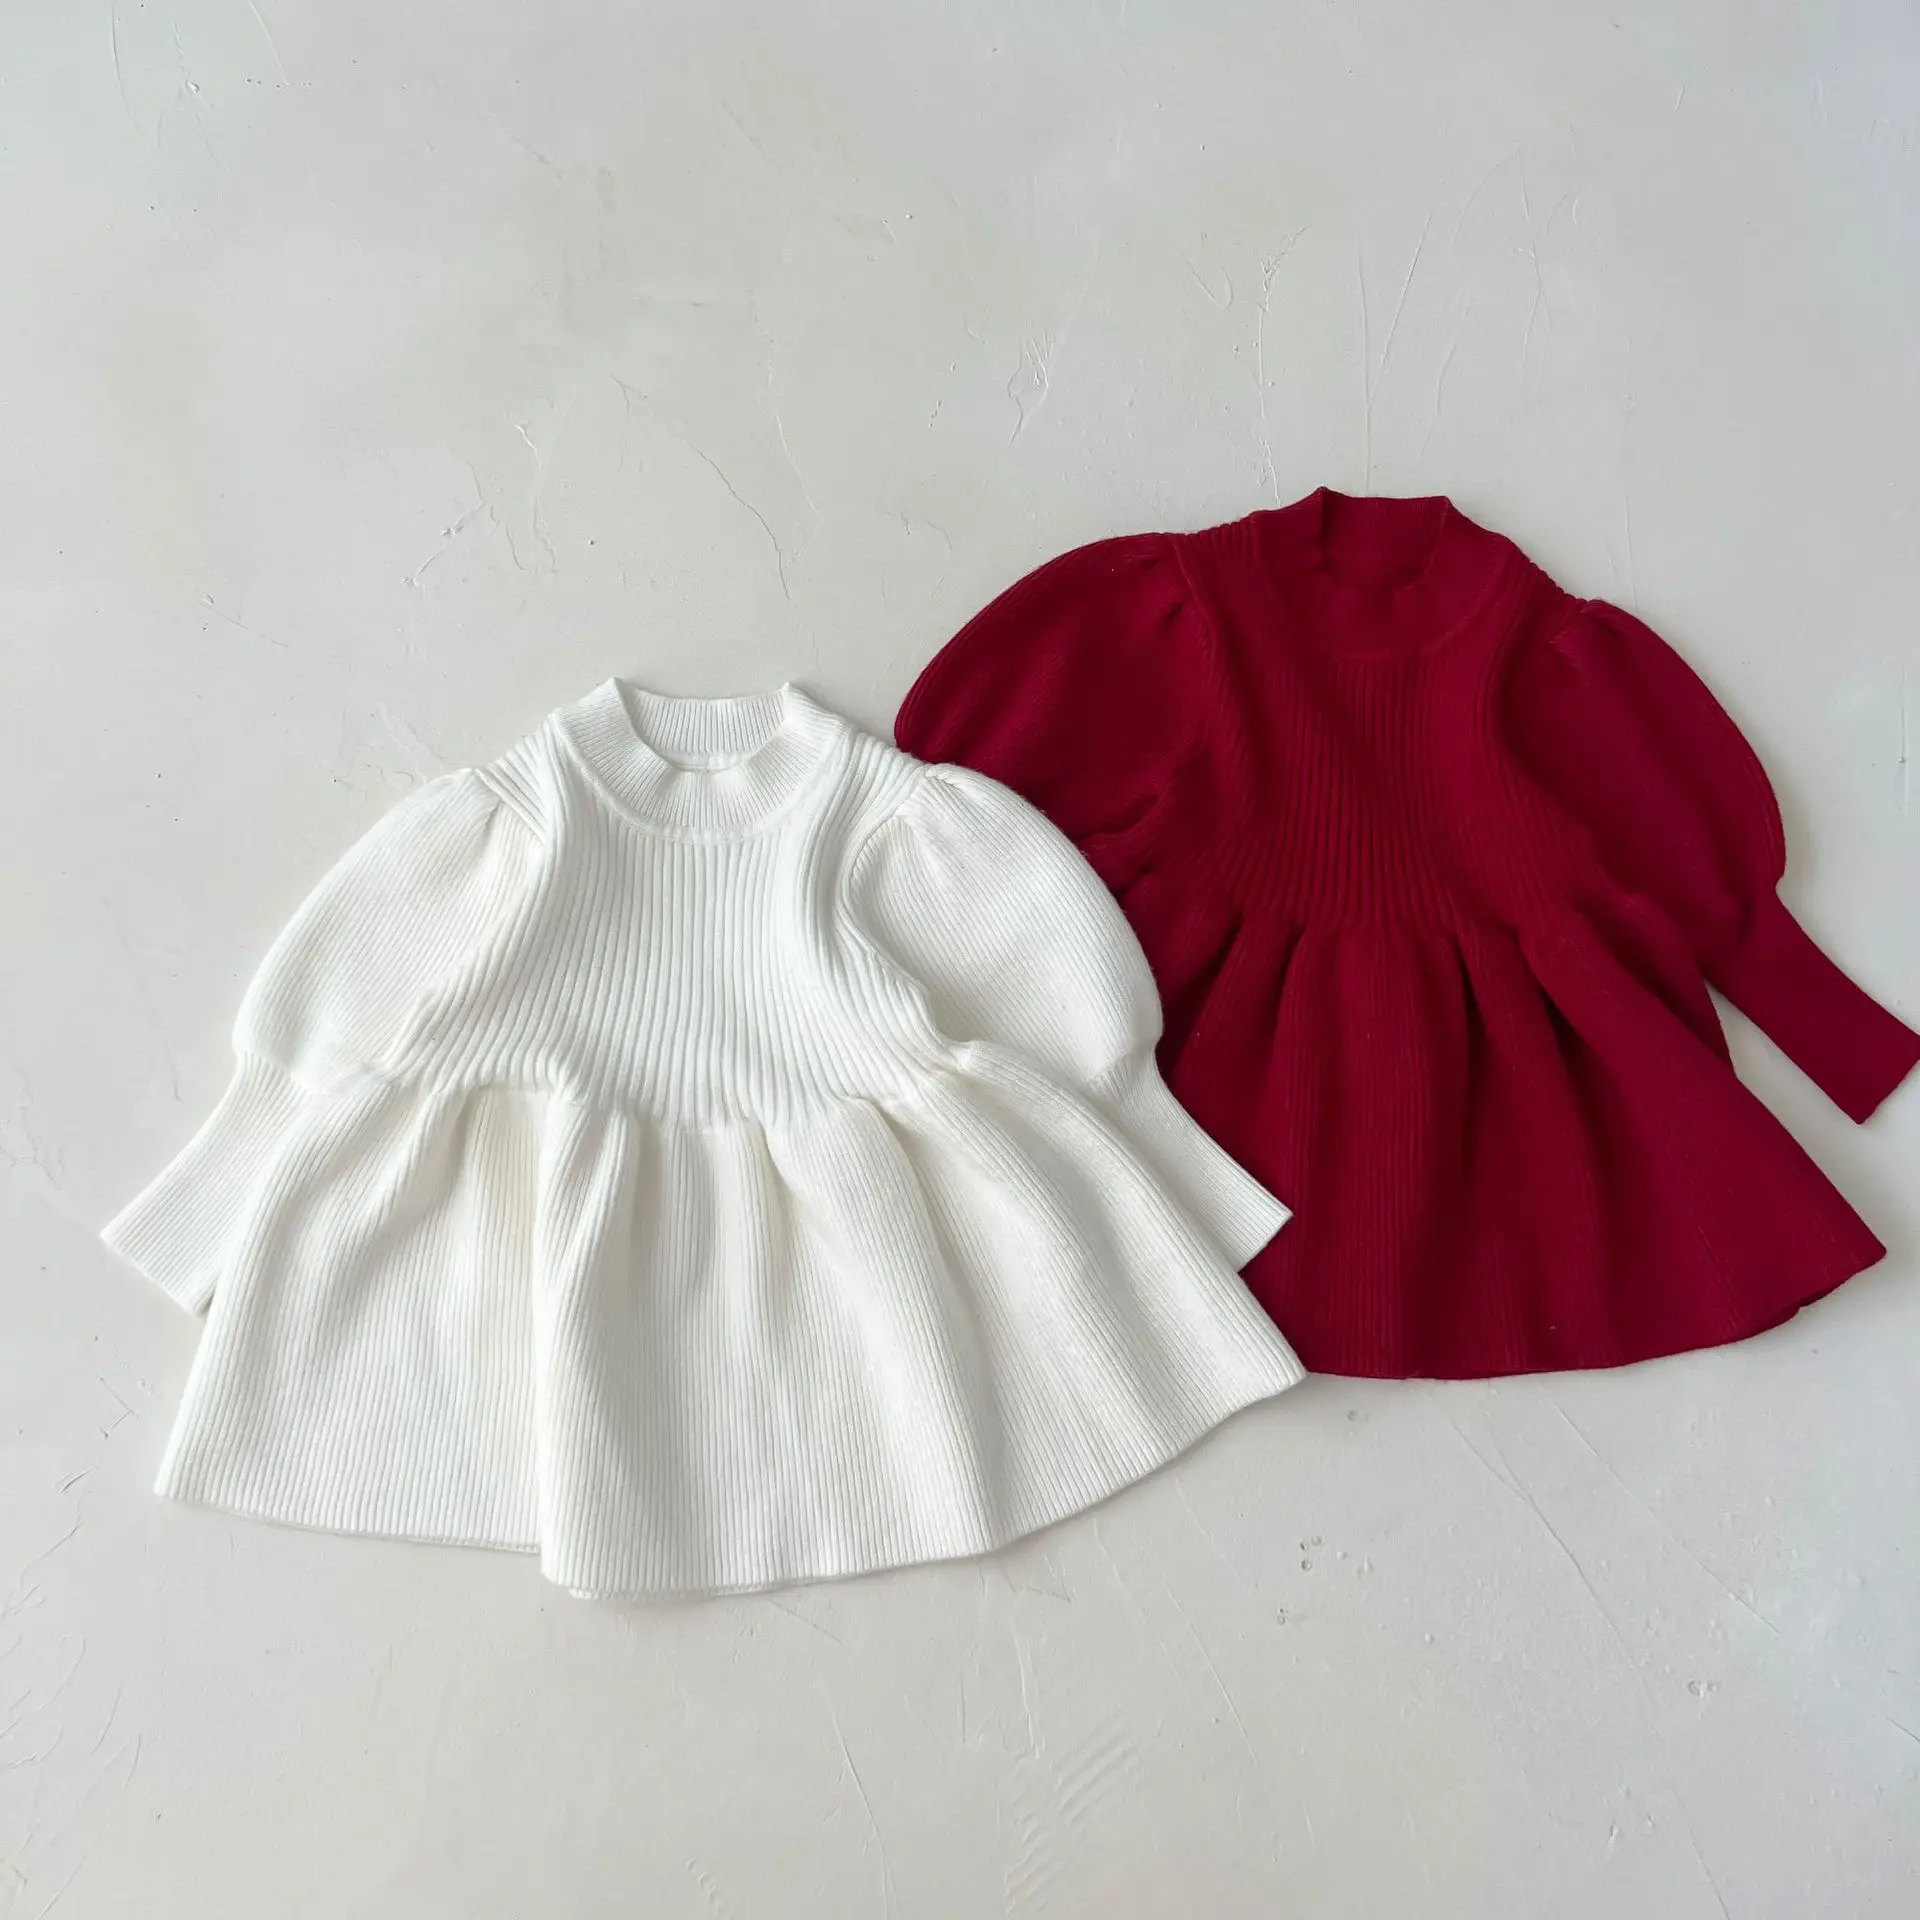 Girls Dress Children's Knitted Skirt Baby Fashion Solid Color Long Sleeve Princess Sweater Warm Cotton Clothes